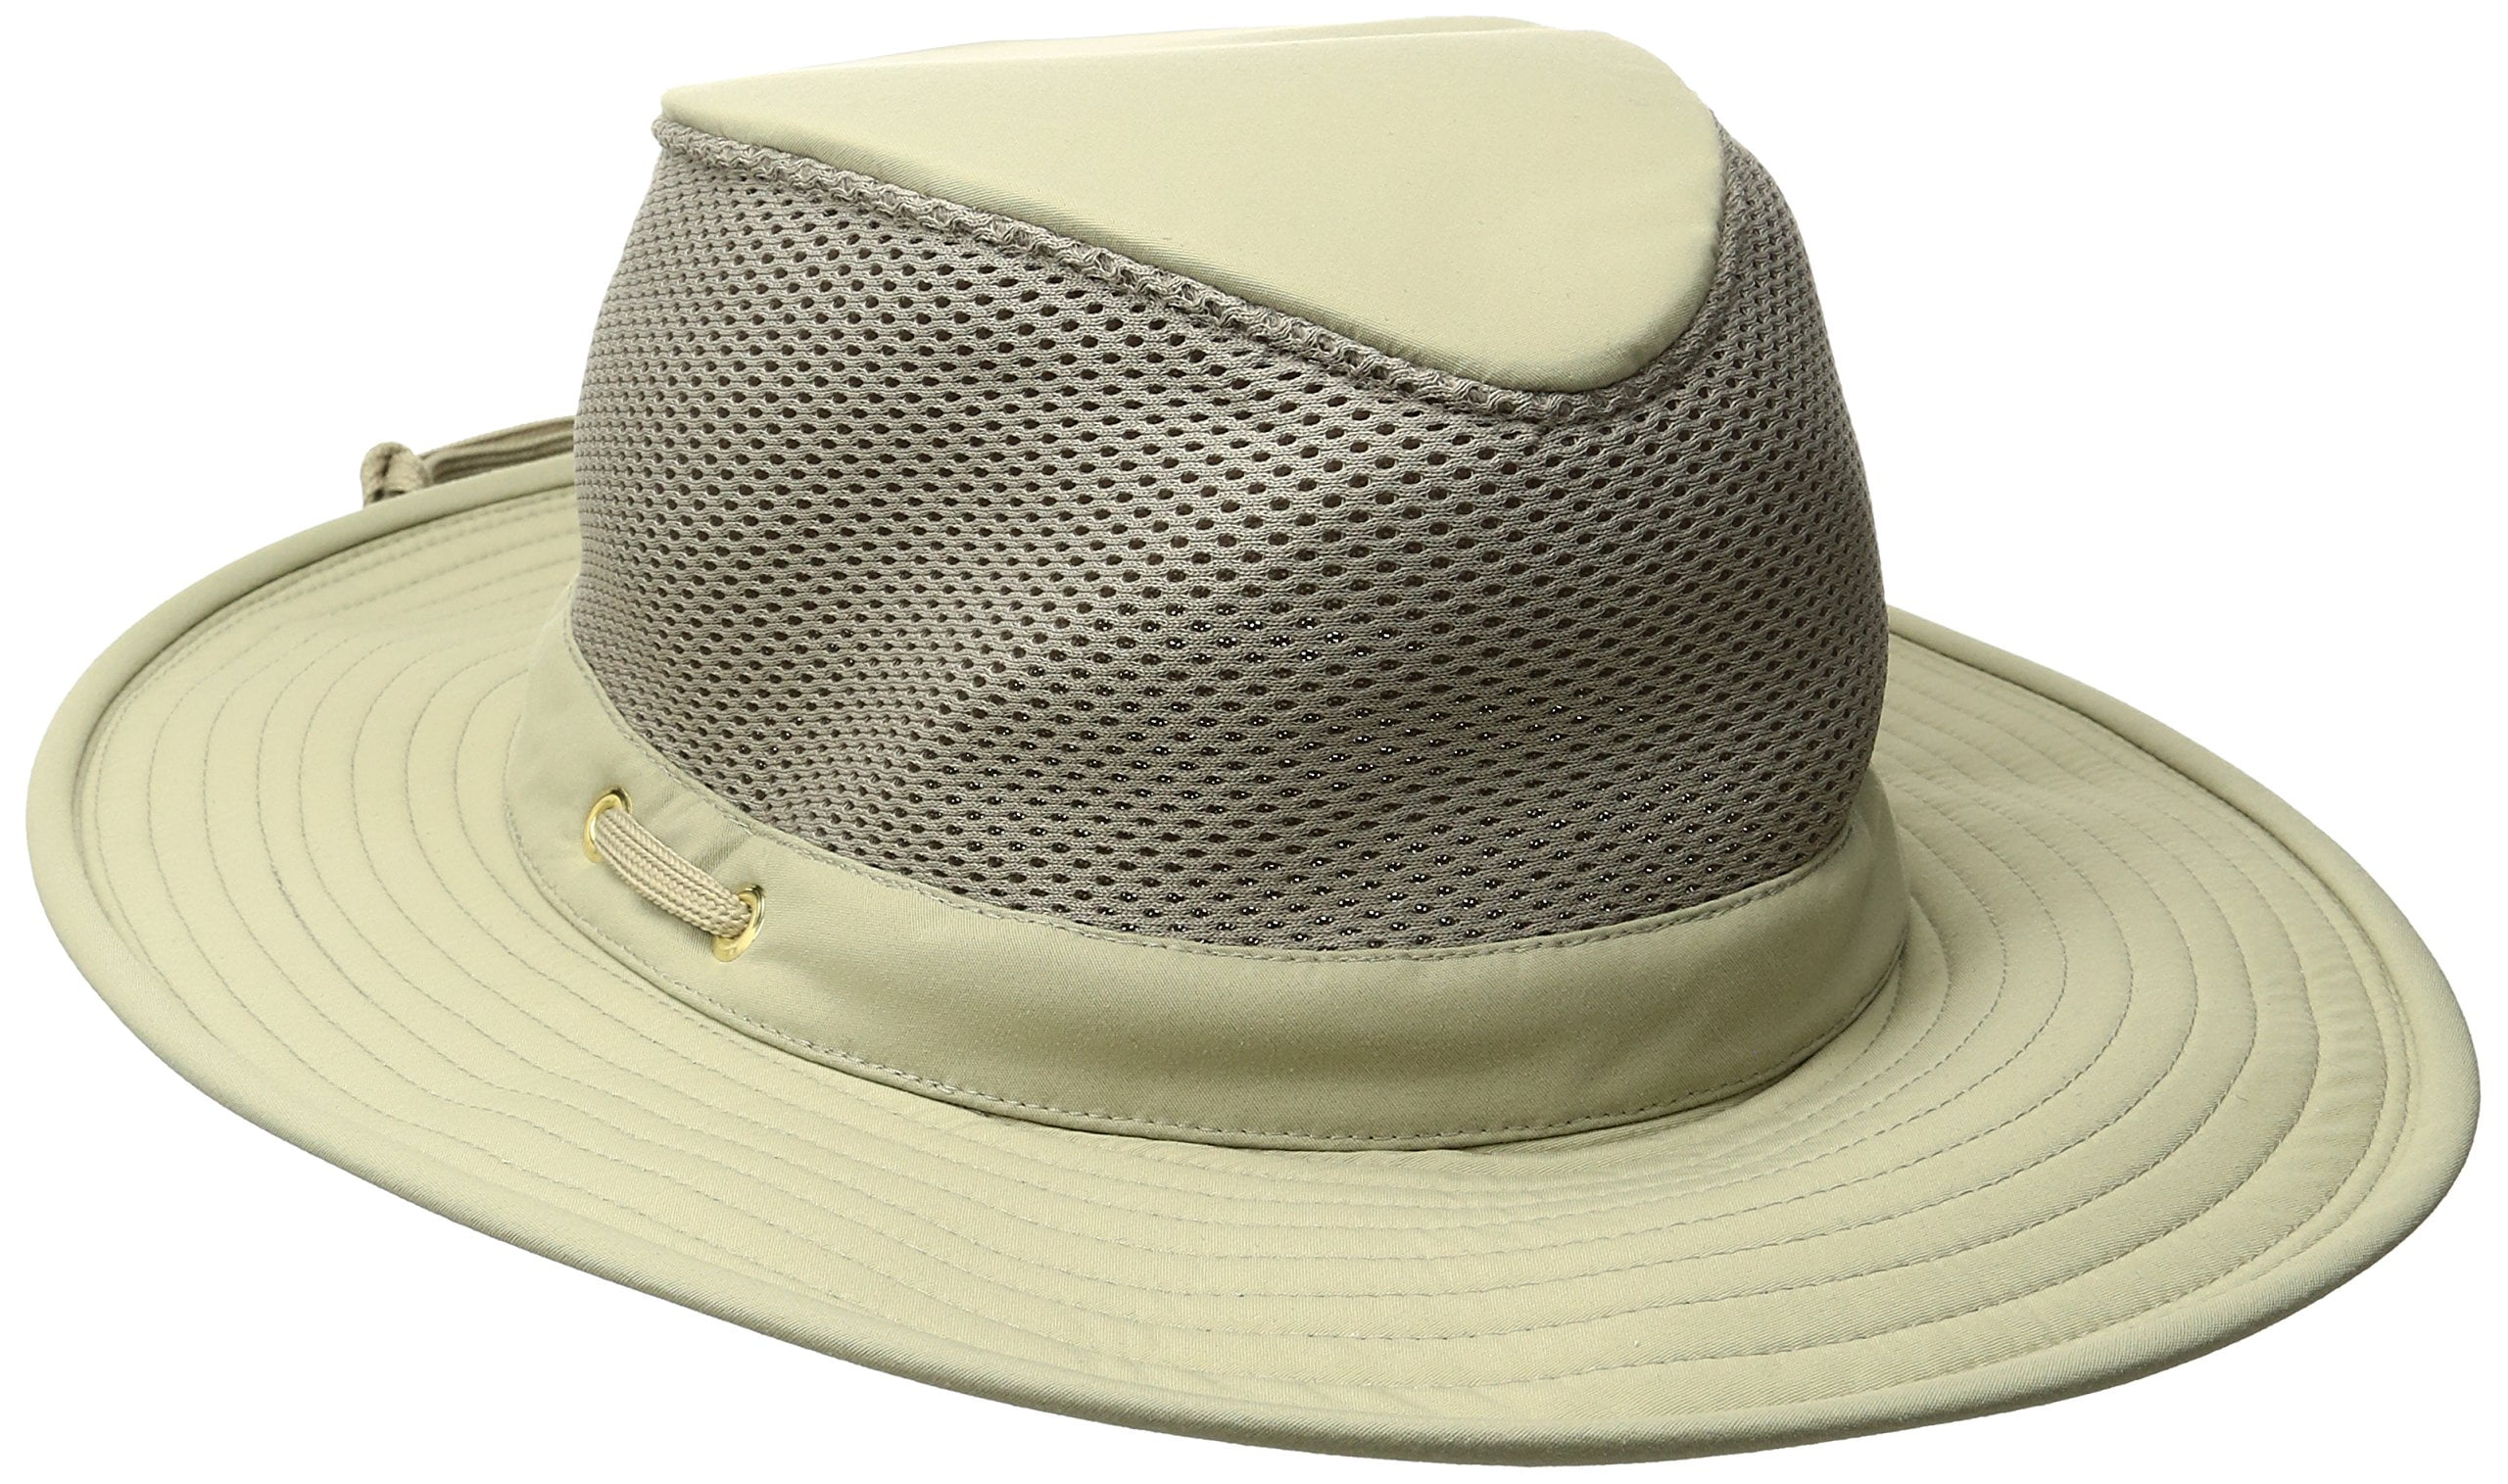 Tilley Size 7 1/4 or 22 3/4 in. Special Order Unisex LTM8 Nylon with High  All Mesh Crown Hat, Khaki with Olive Underbrim 